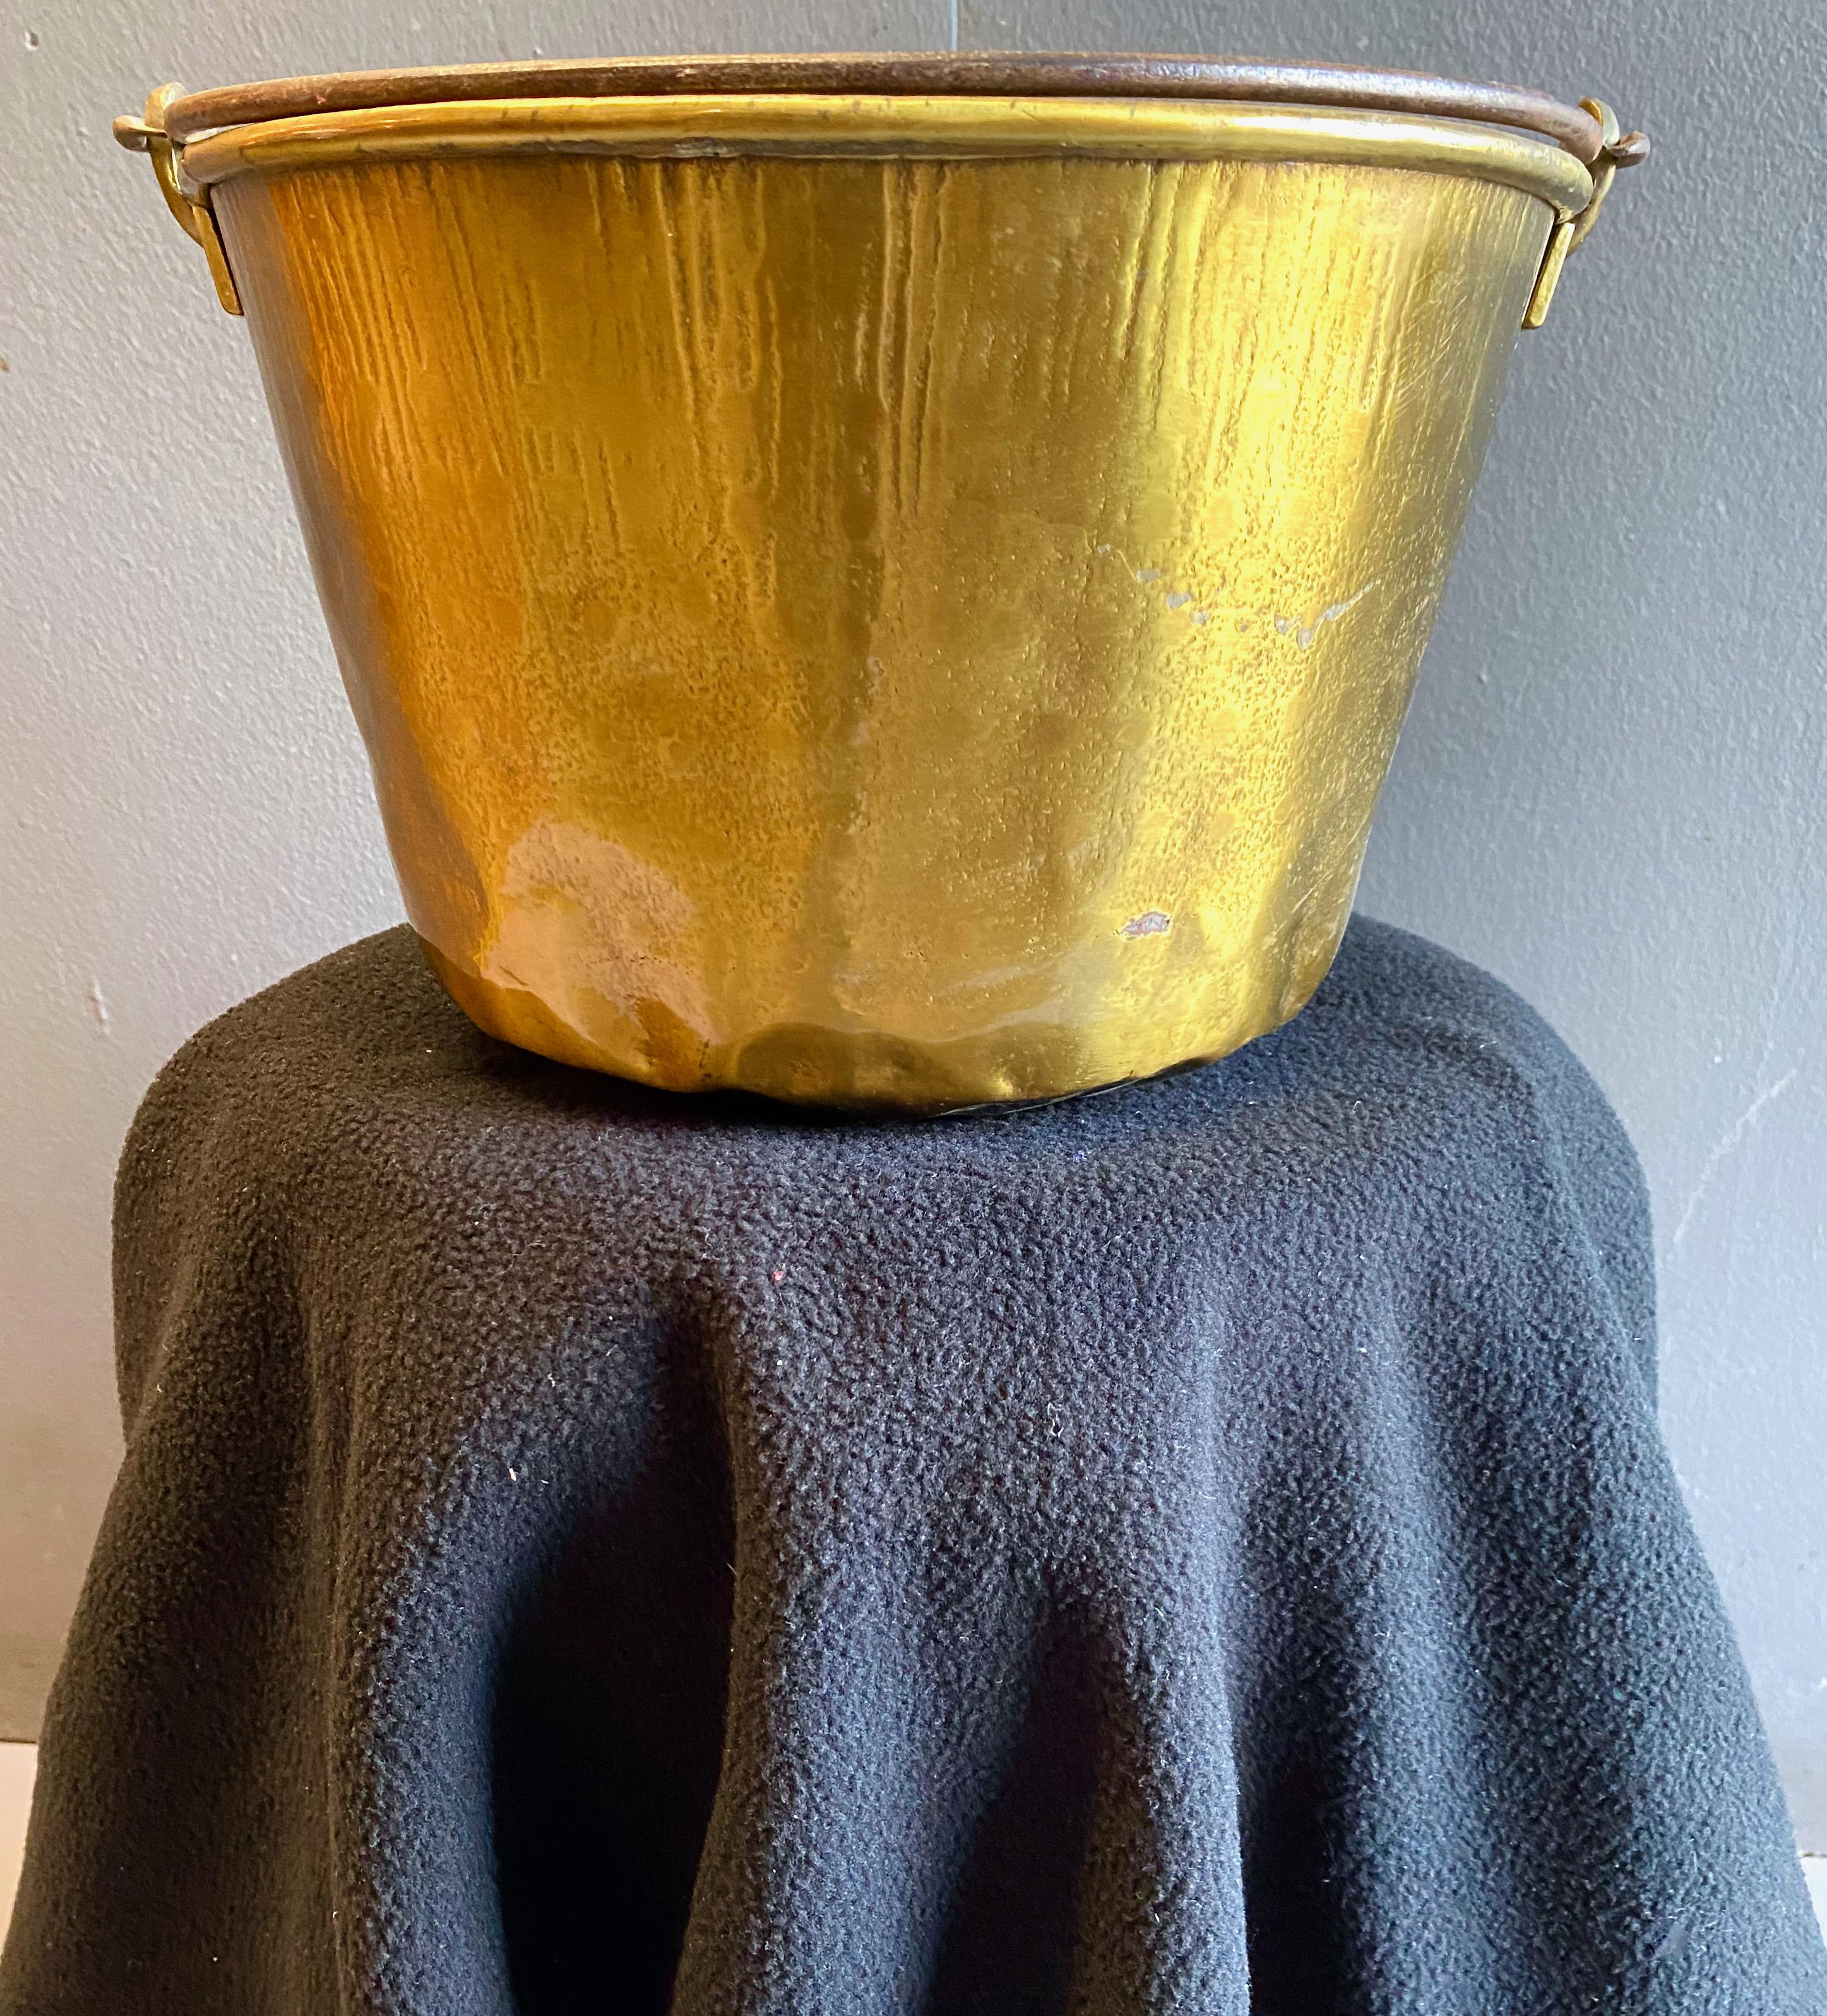 This is a classic mid-19th century spun brass bucket with a forged steel handle.
The bucket is in overall good condition with the normal anticipated dings and patina. The bucket is a great decorative element--especially on Halloween, with Christmas